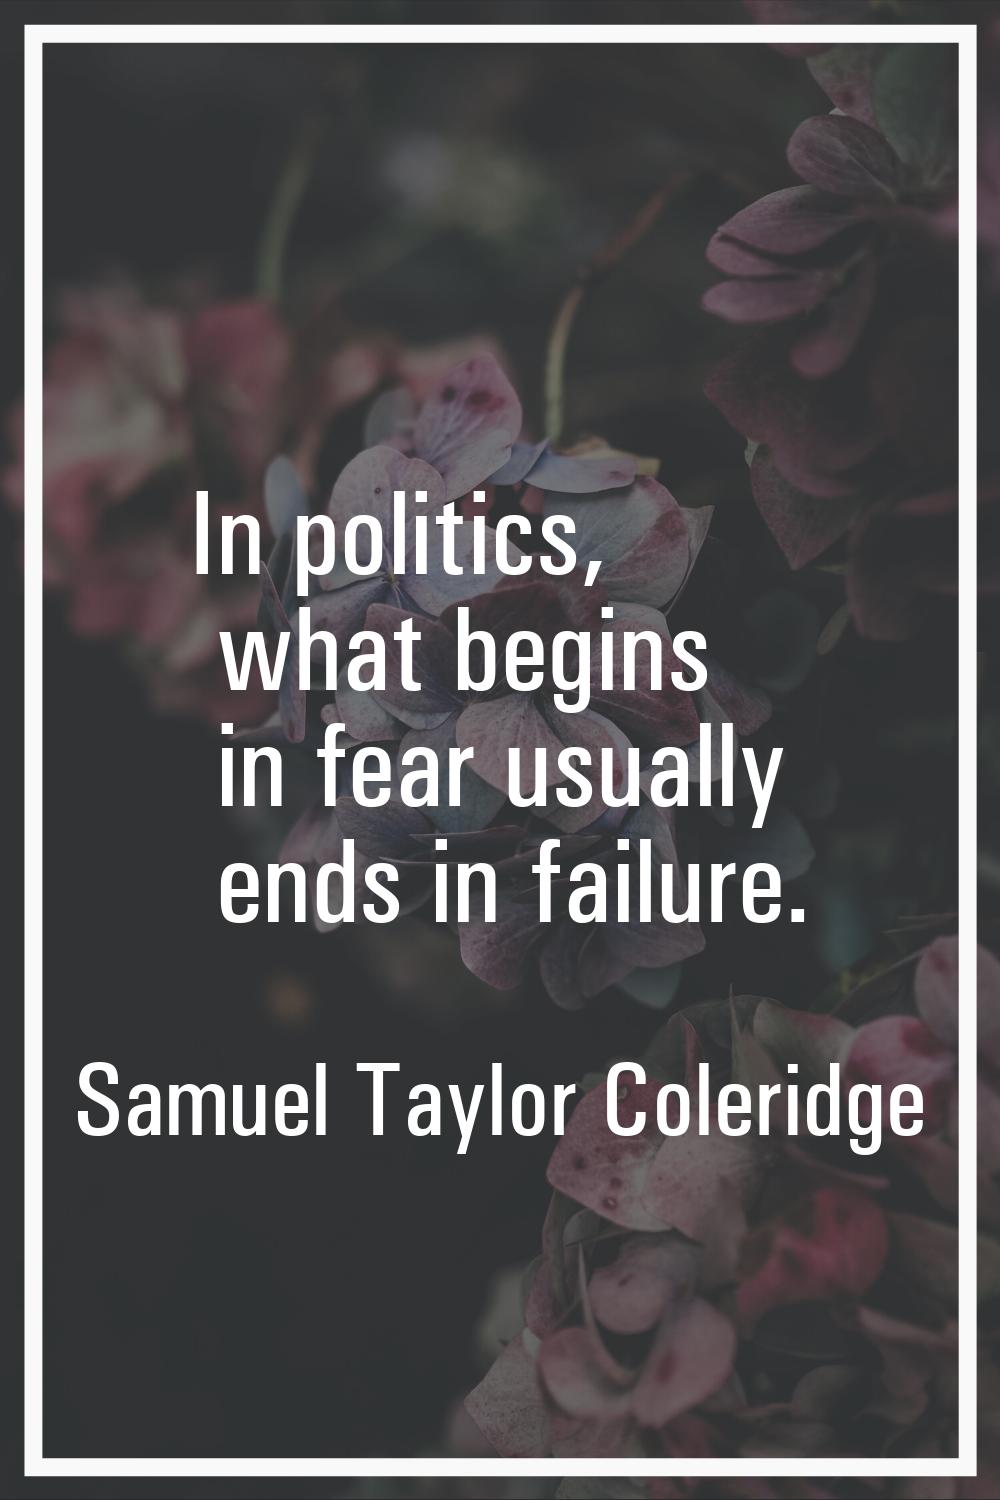 In politics, what begins in fear usually ends in failure.